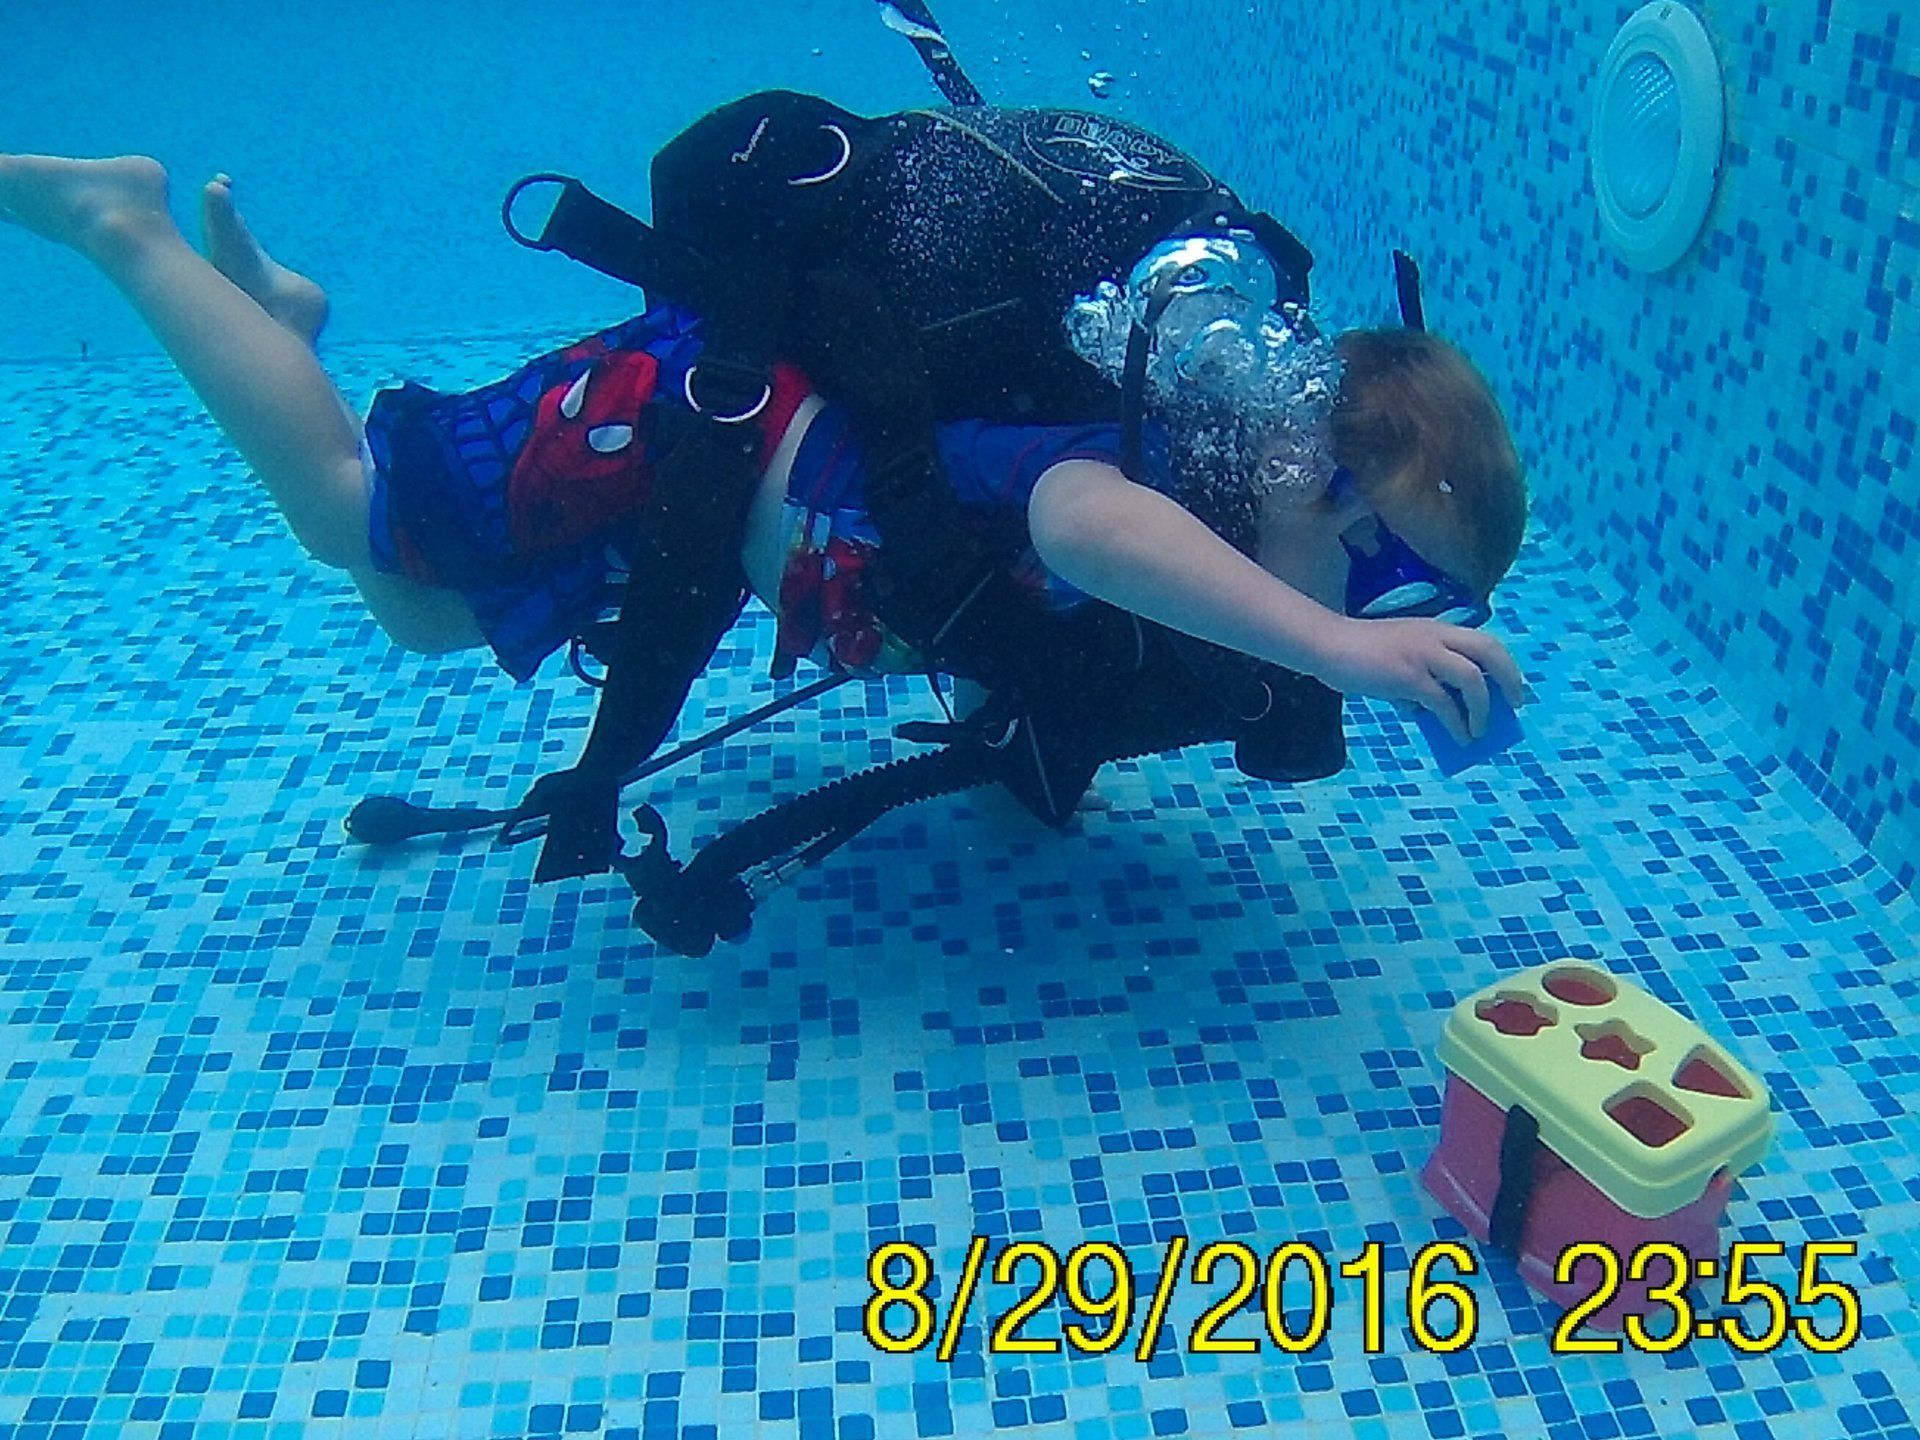 An underwater view of a child scuba diving placing a toy in a box